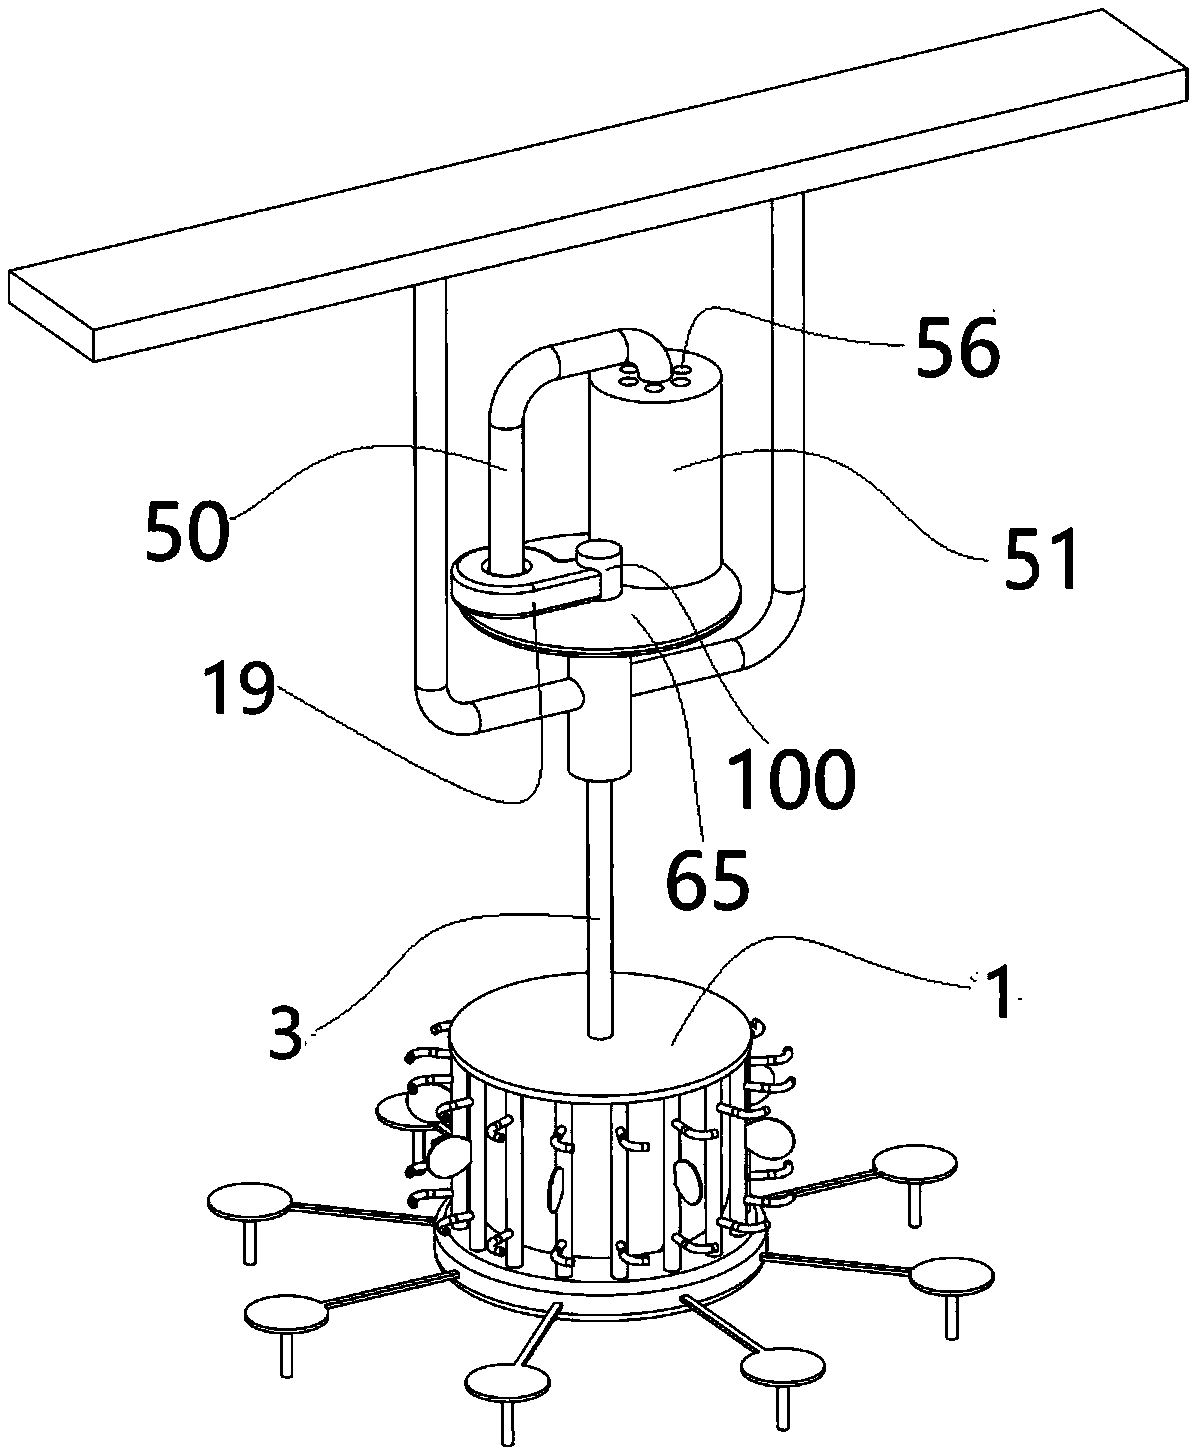 Oxygenation and aeration device and method for sewage purification